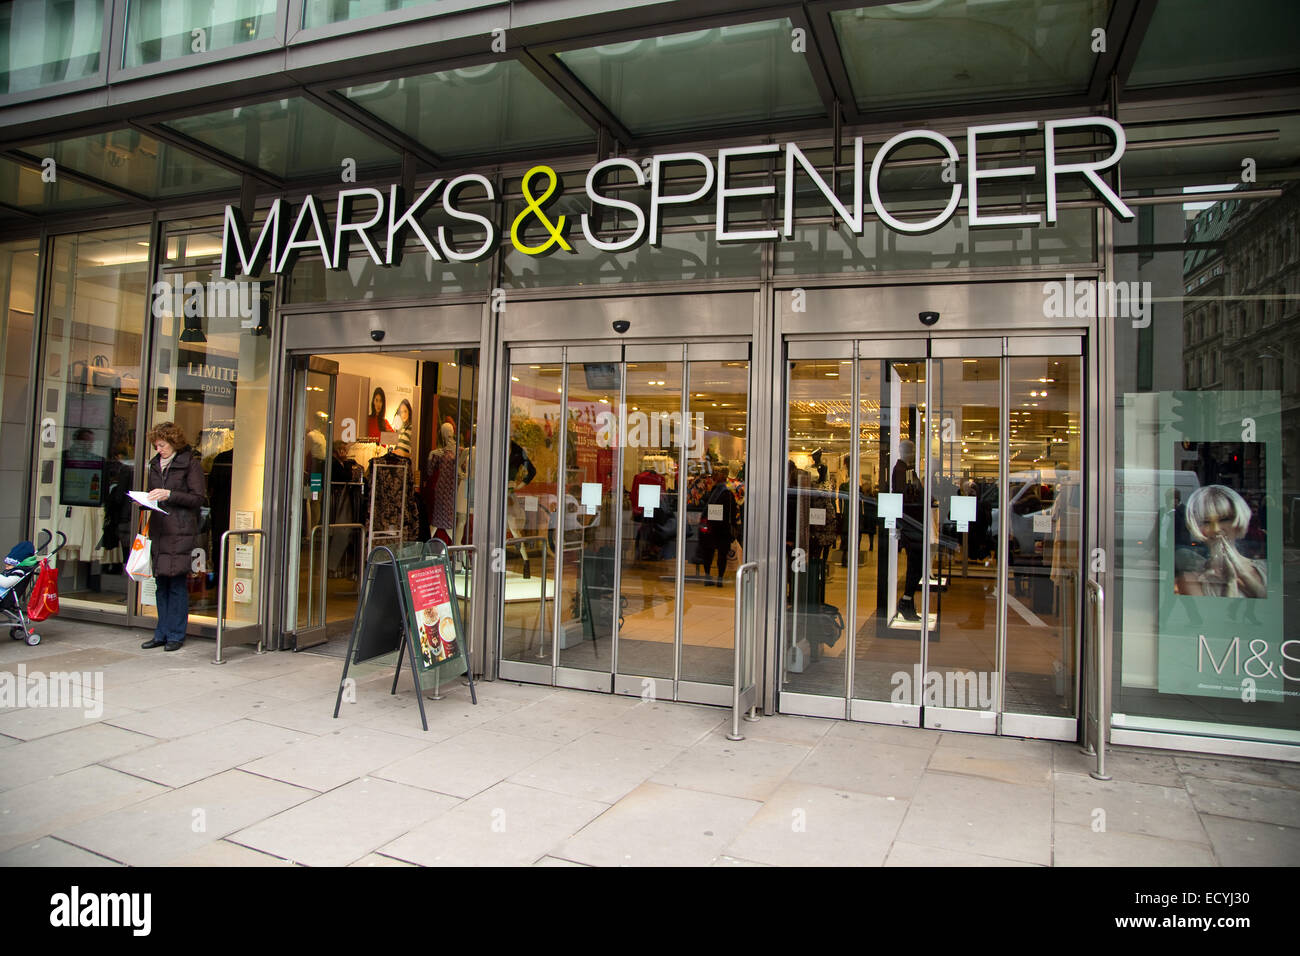 LONDON - NOVEMBER 25TH: The exterior of marks and spencer's on November the 25th, 2014, in London, England, UK. M&S is one of th Stock Photo